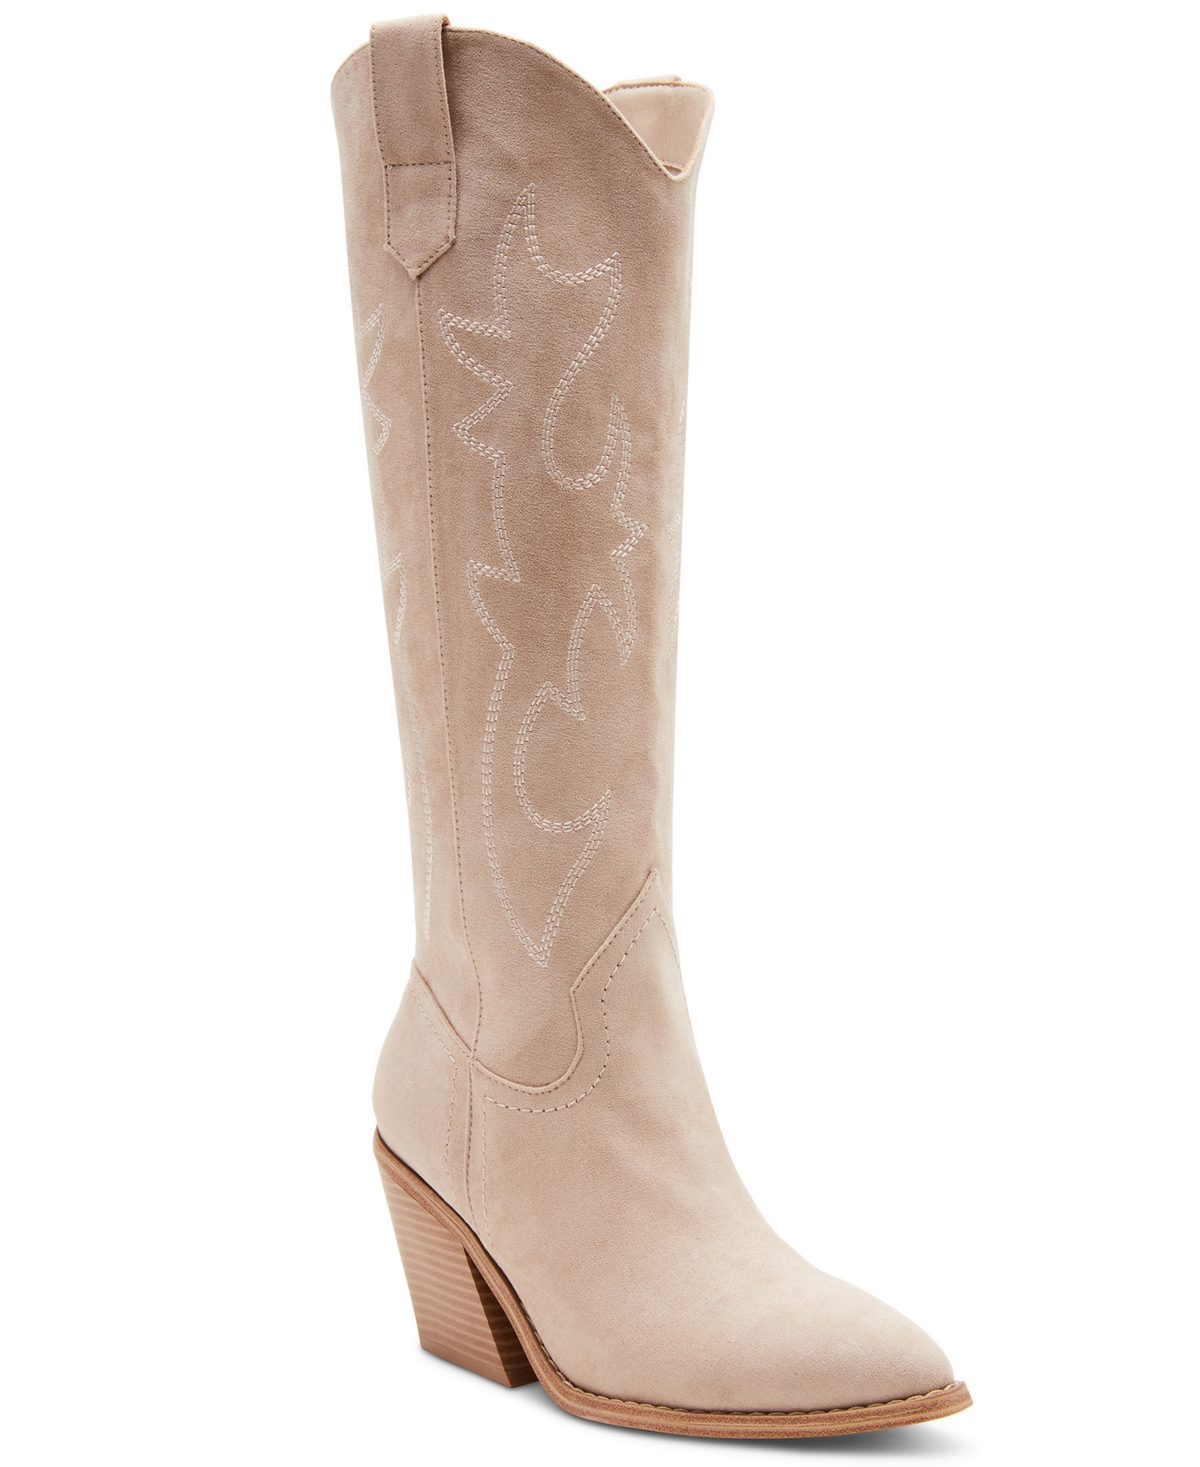 Madden Girl Arizona Knee High Cowboy Boots In Stone Suede